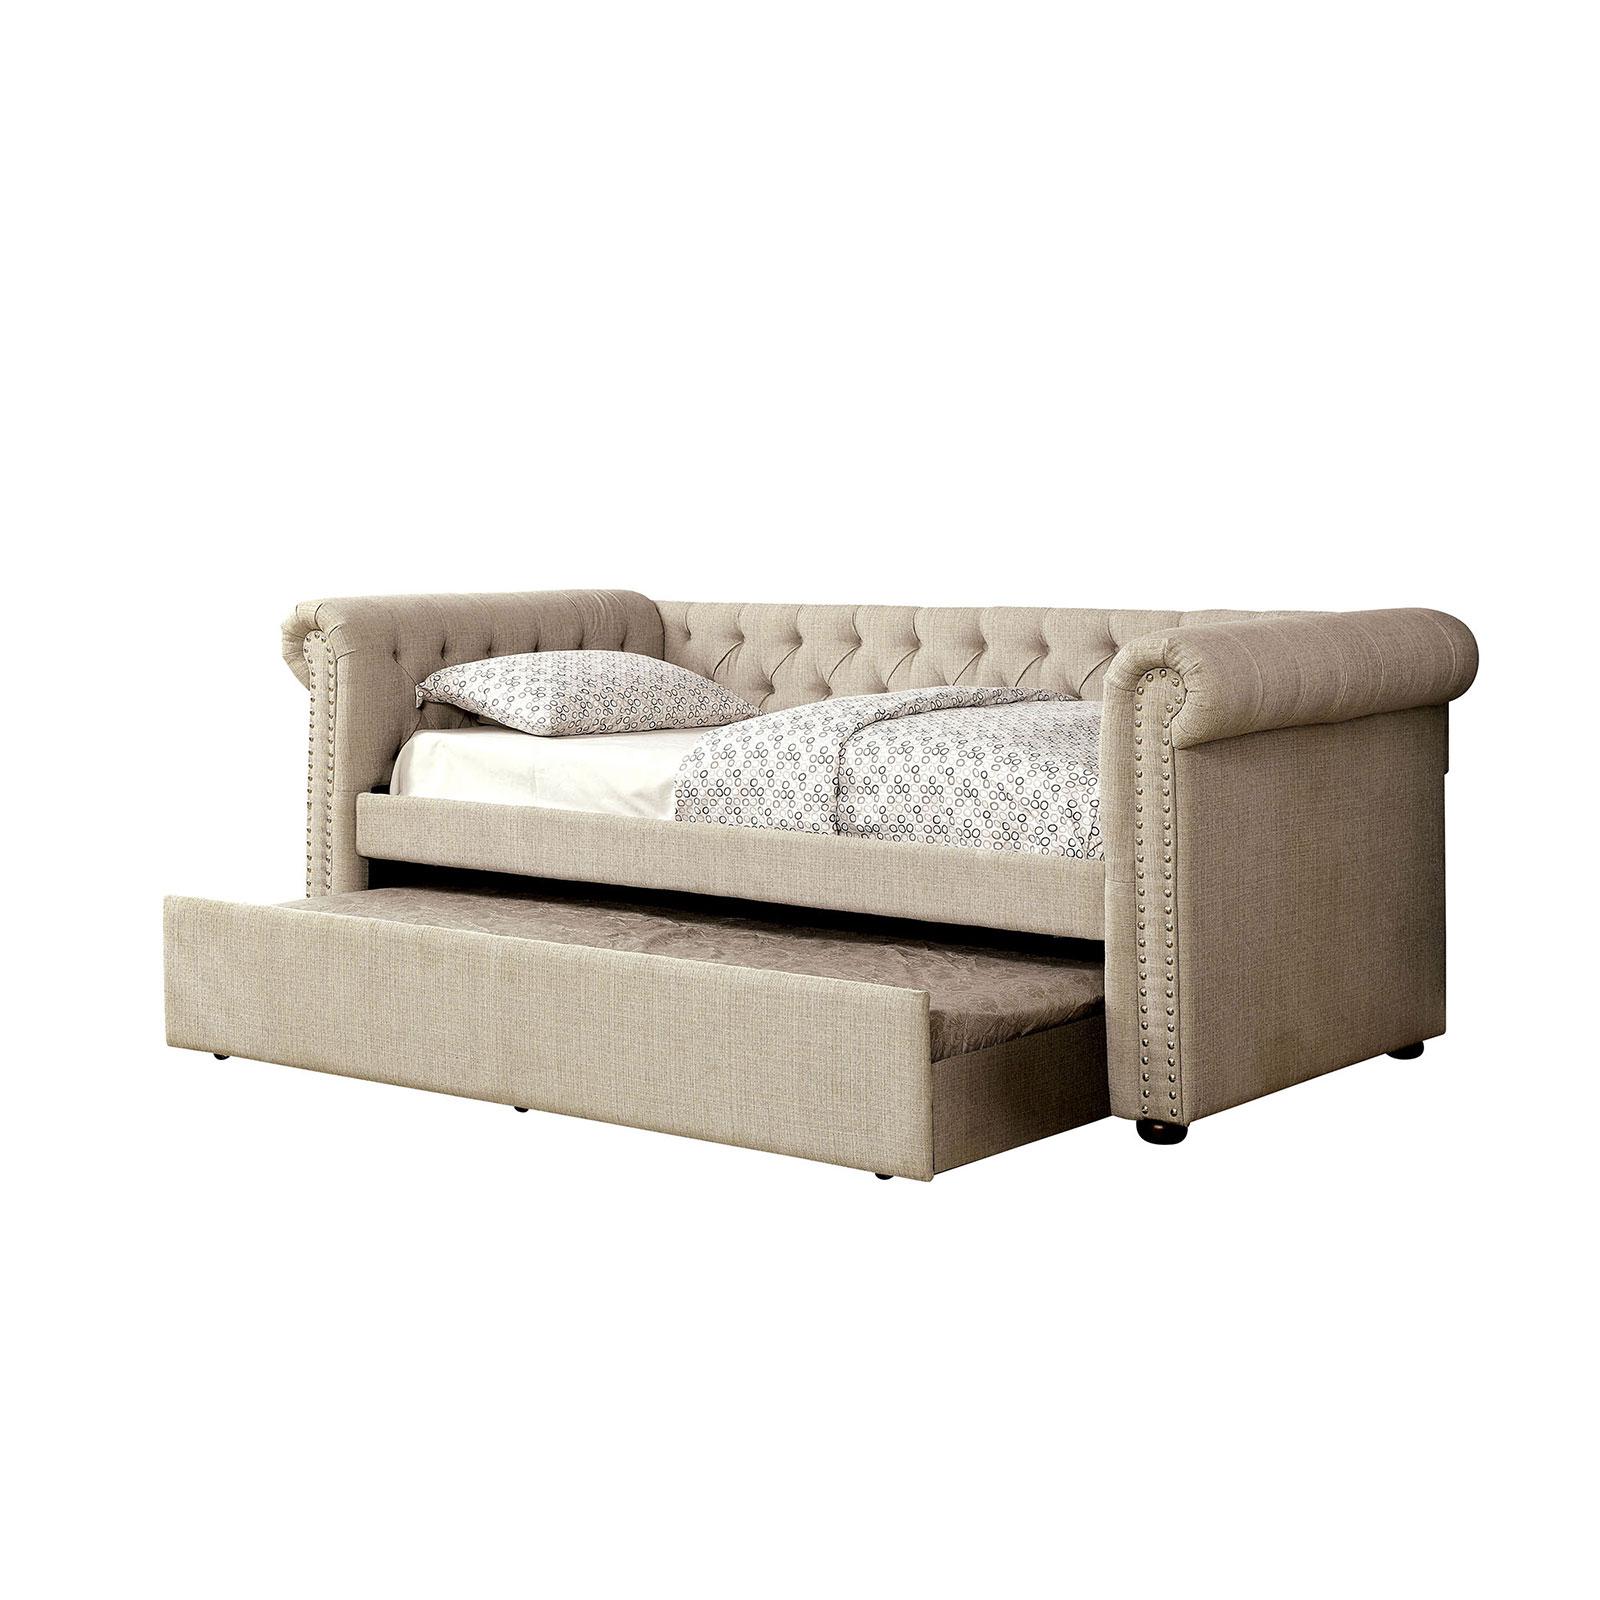 Contemporary Daybed LEANNA CM1027BG-BED CM1027BG-BED in Beige Fabric